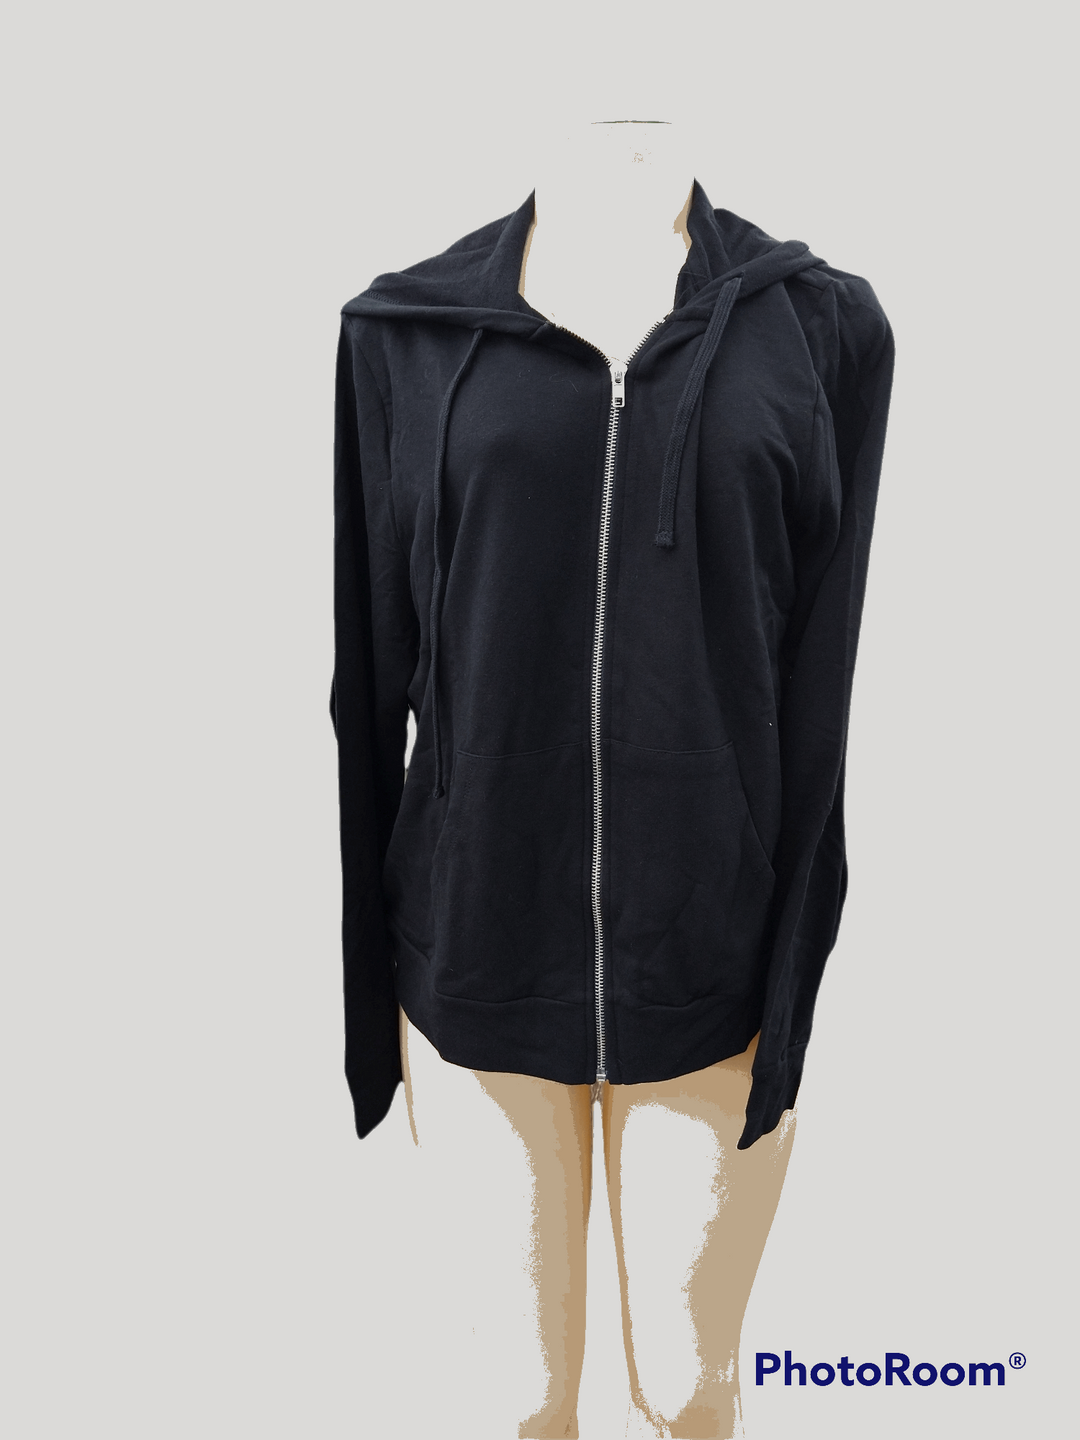 Black French Terry Full Zip Jacket/Hoodie - The Fix Clothing